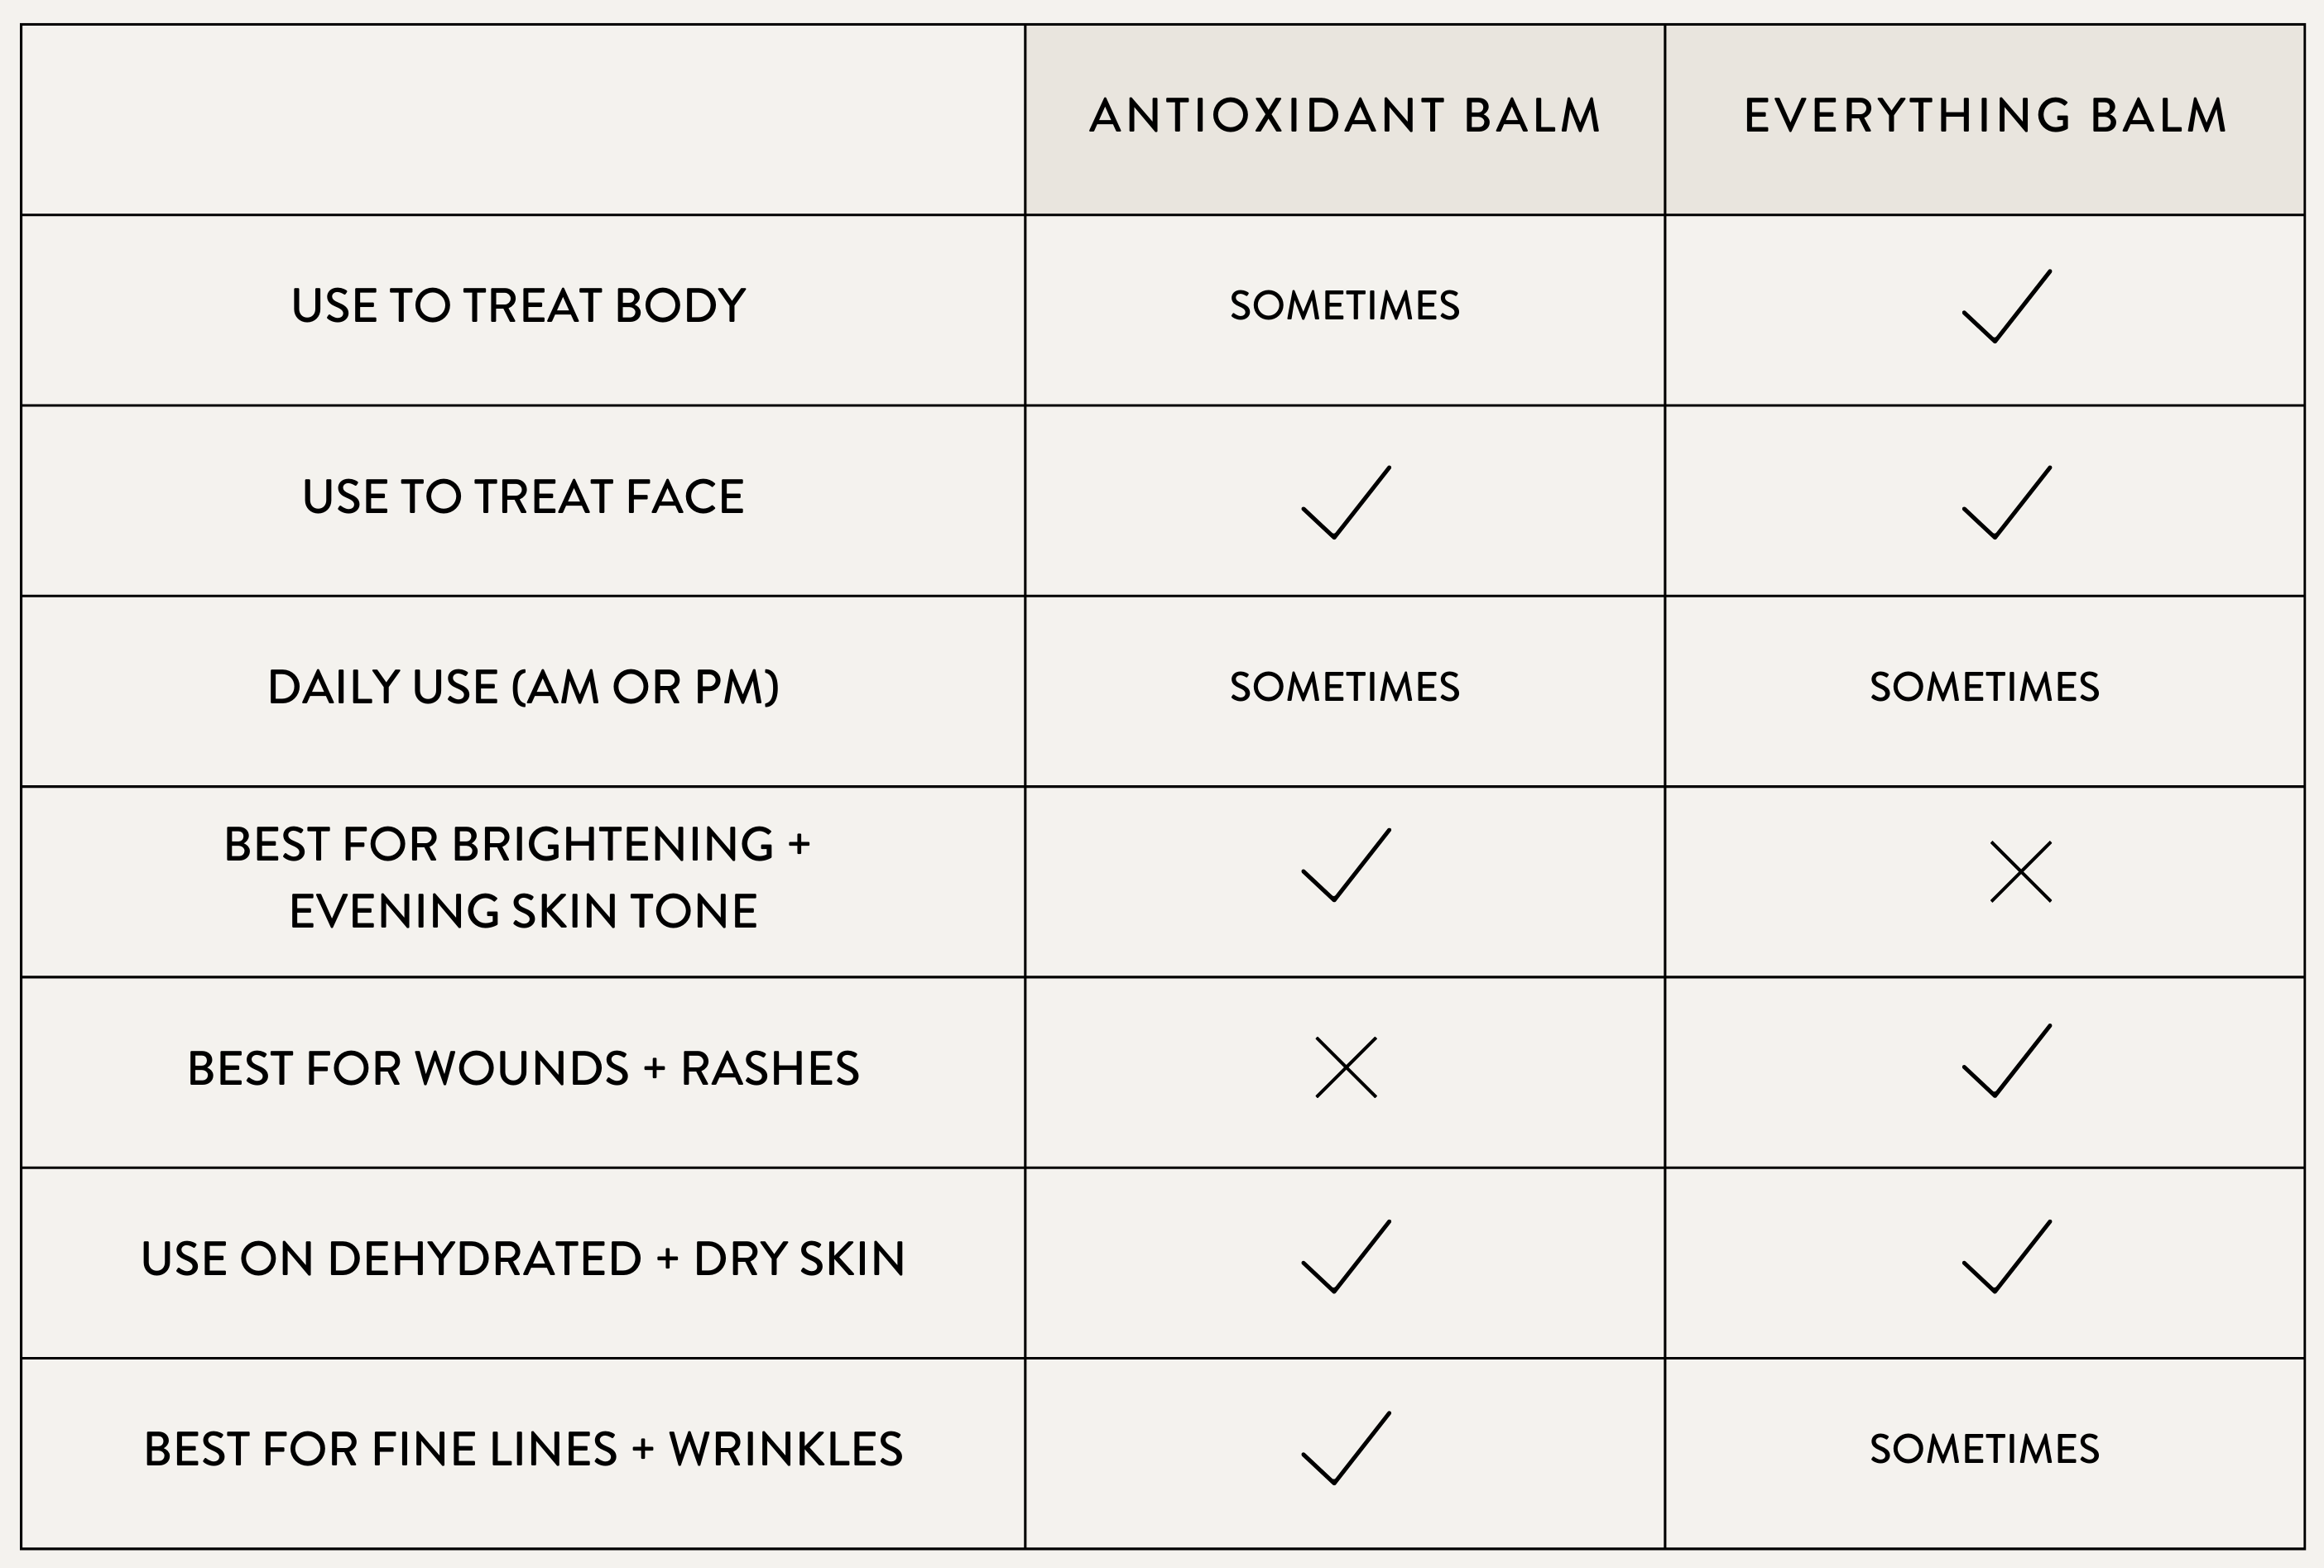 How to use Balms from Primally Pure